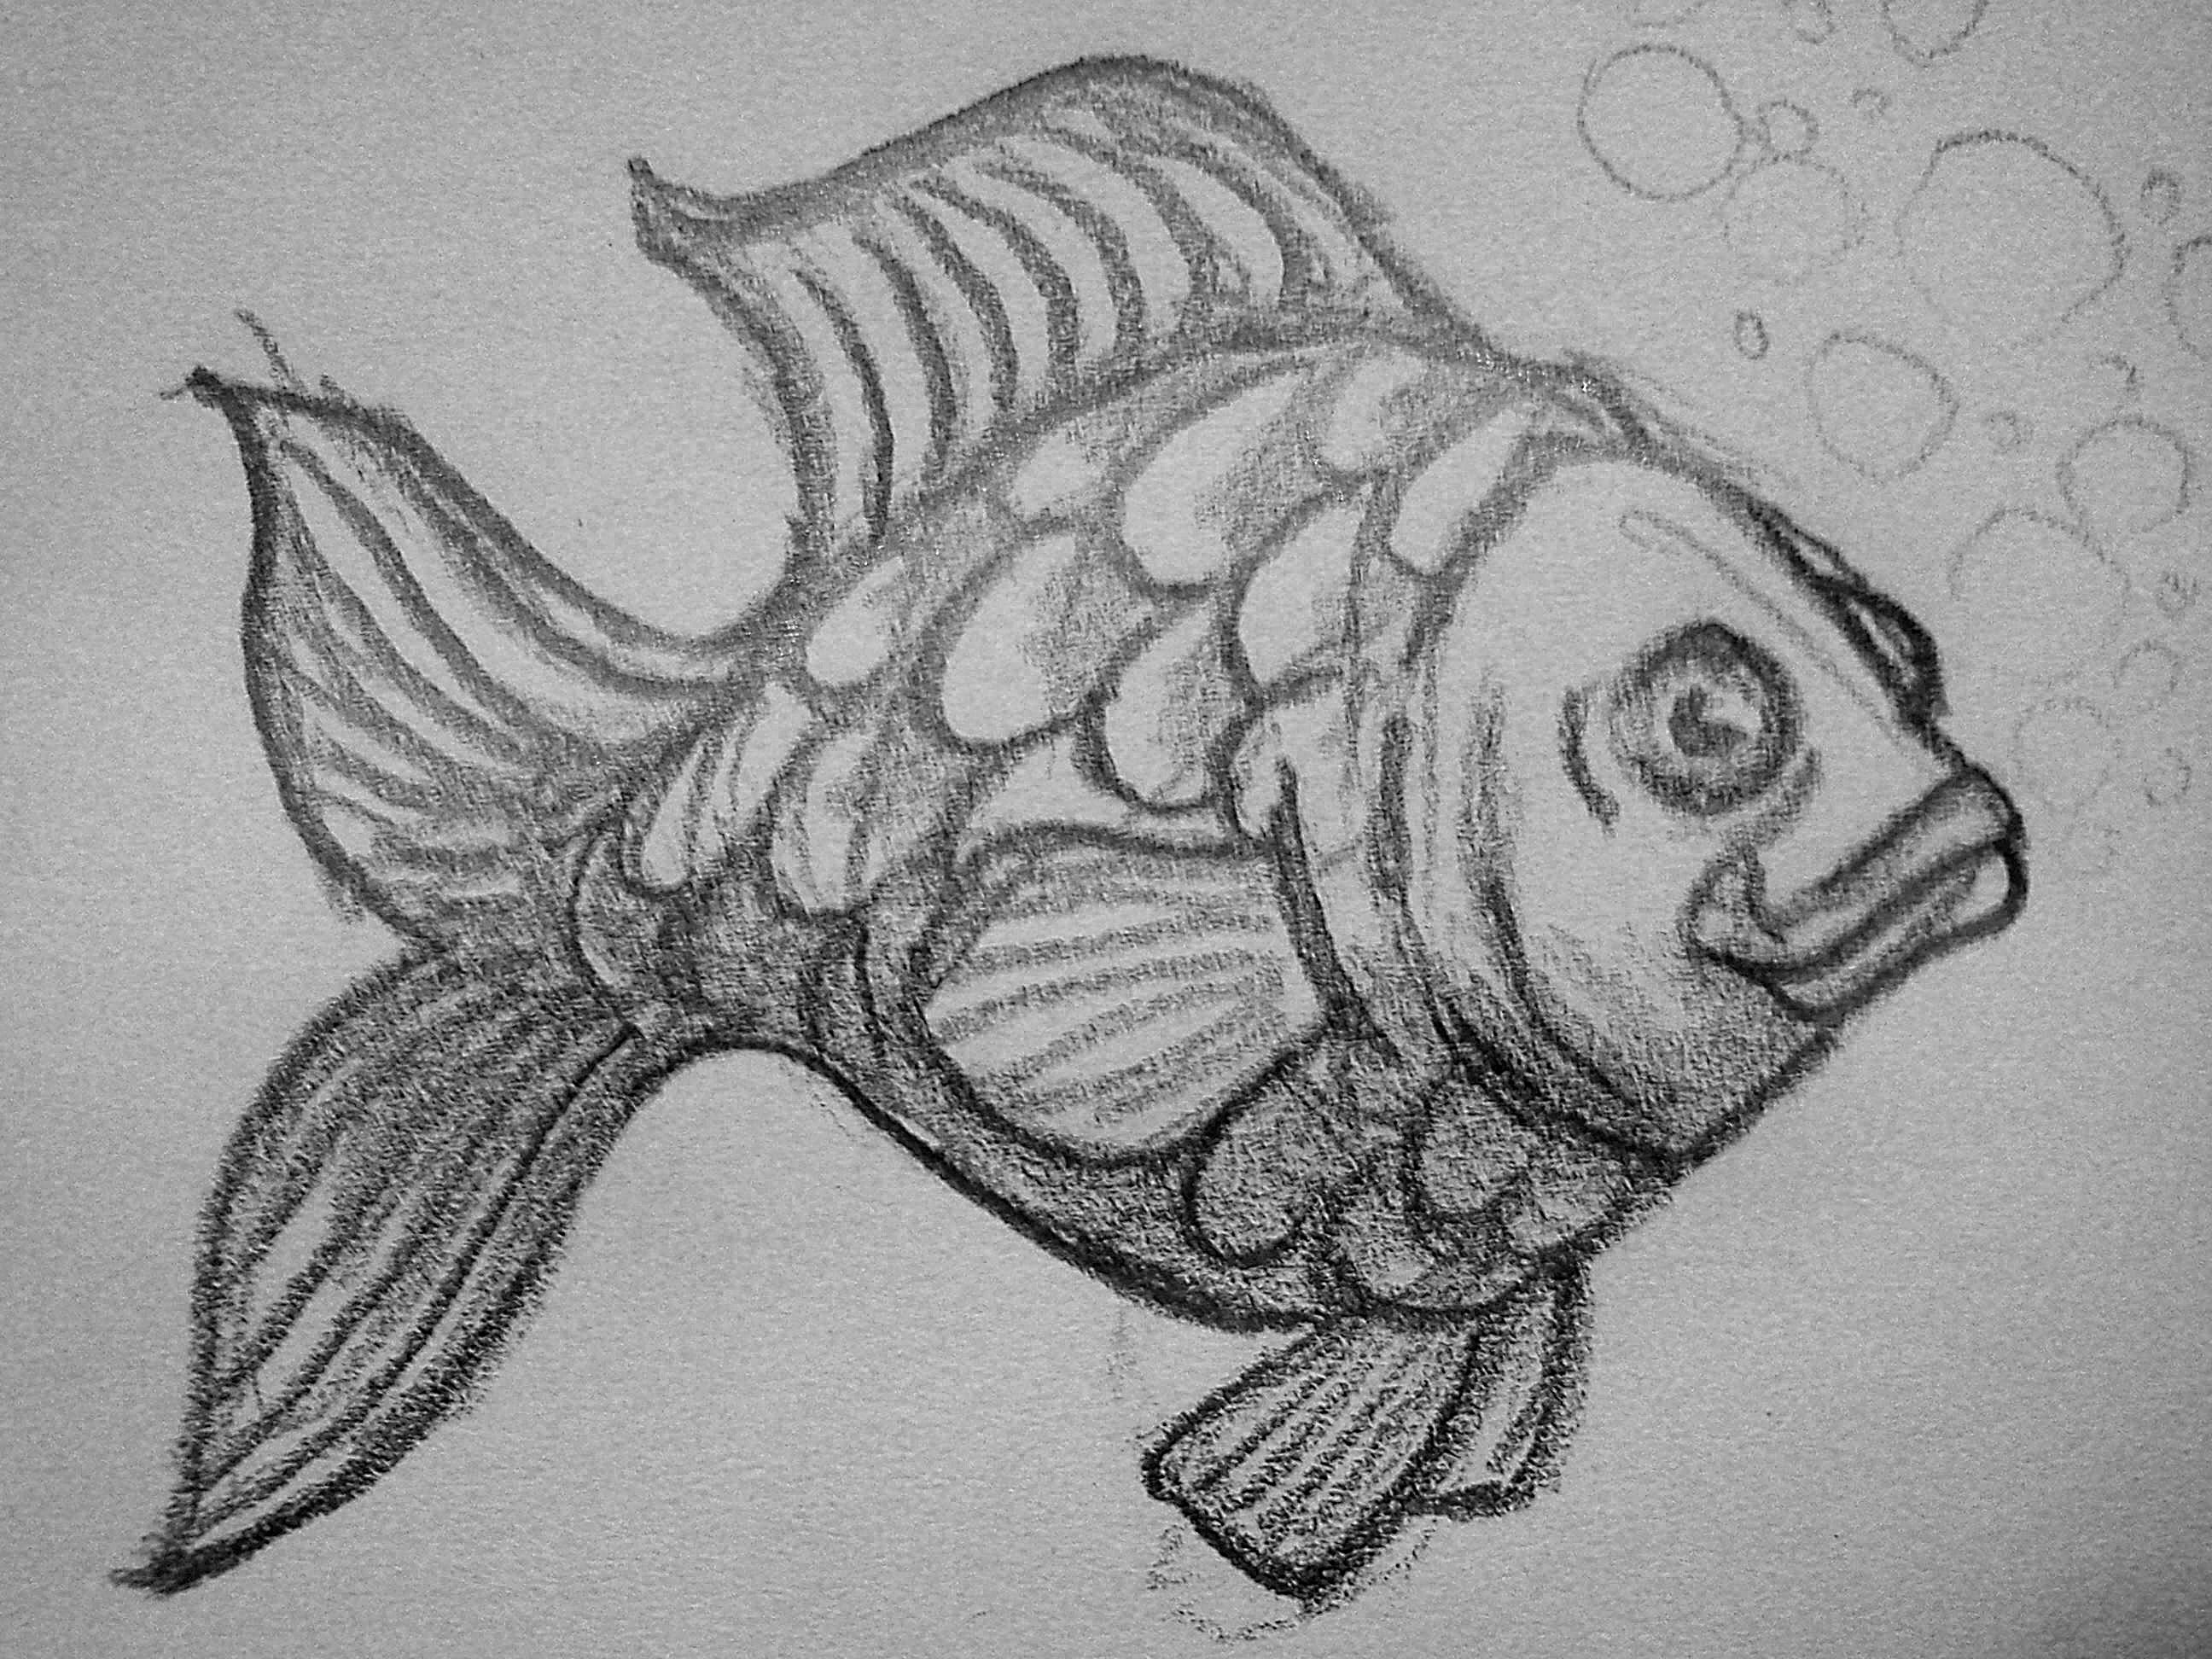 Fish - Sketch for not performed Woodcut | Sketches | Pinterest ...